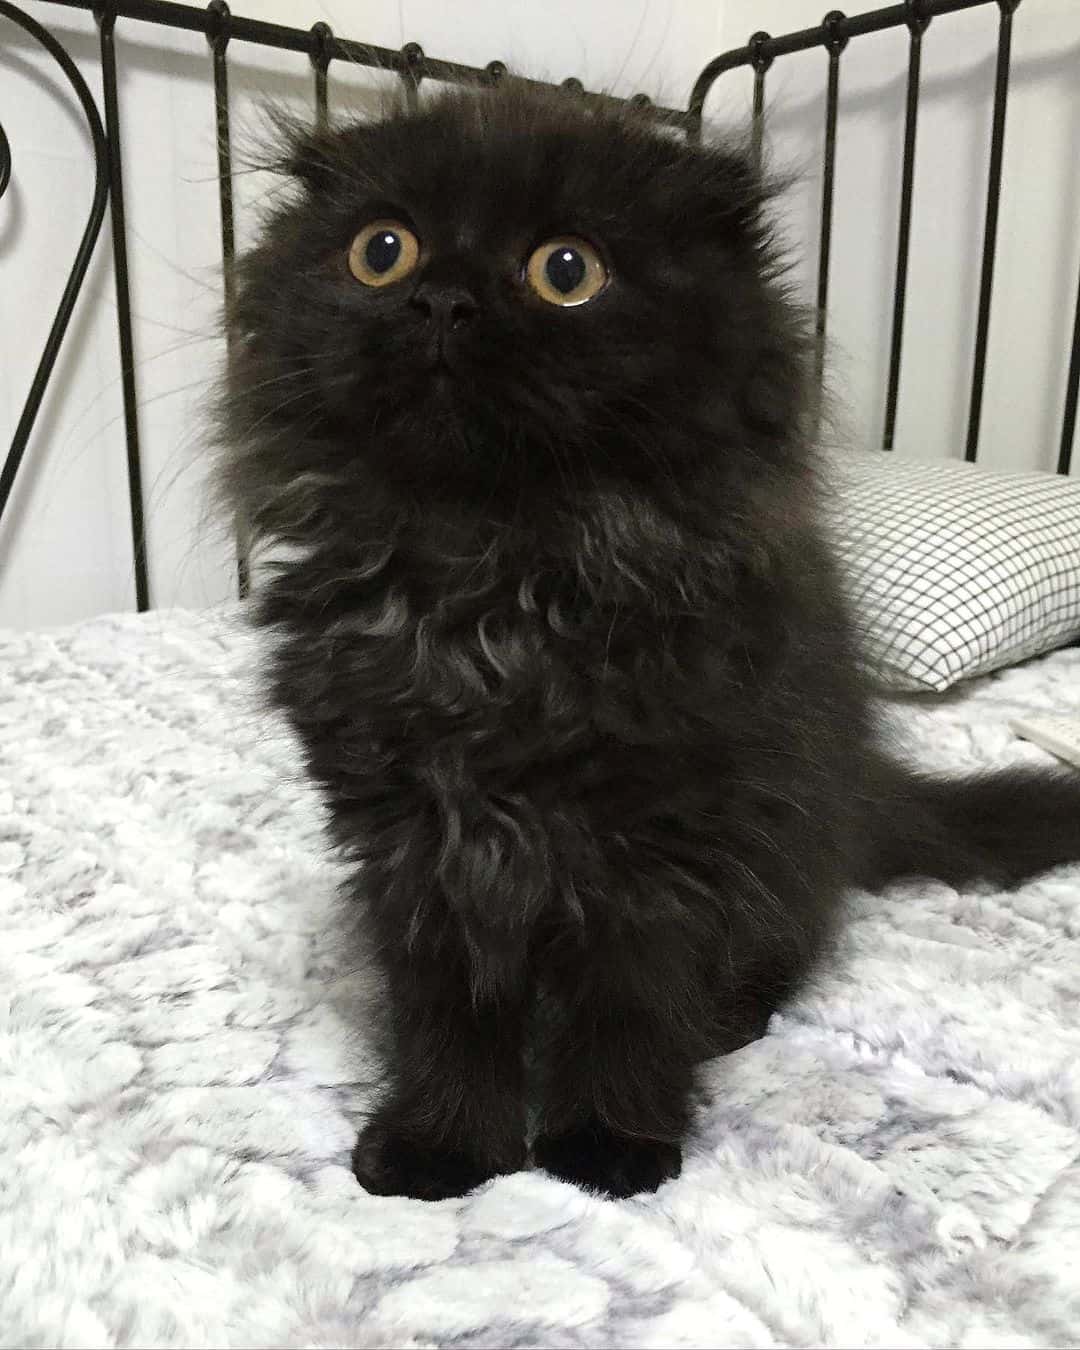 a black cat with big eyes is sitting on the bed and looking at the camera